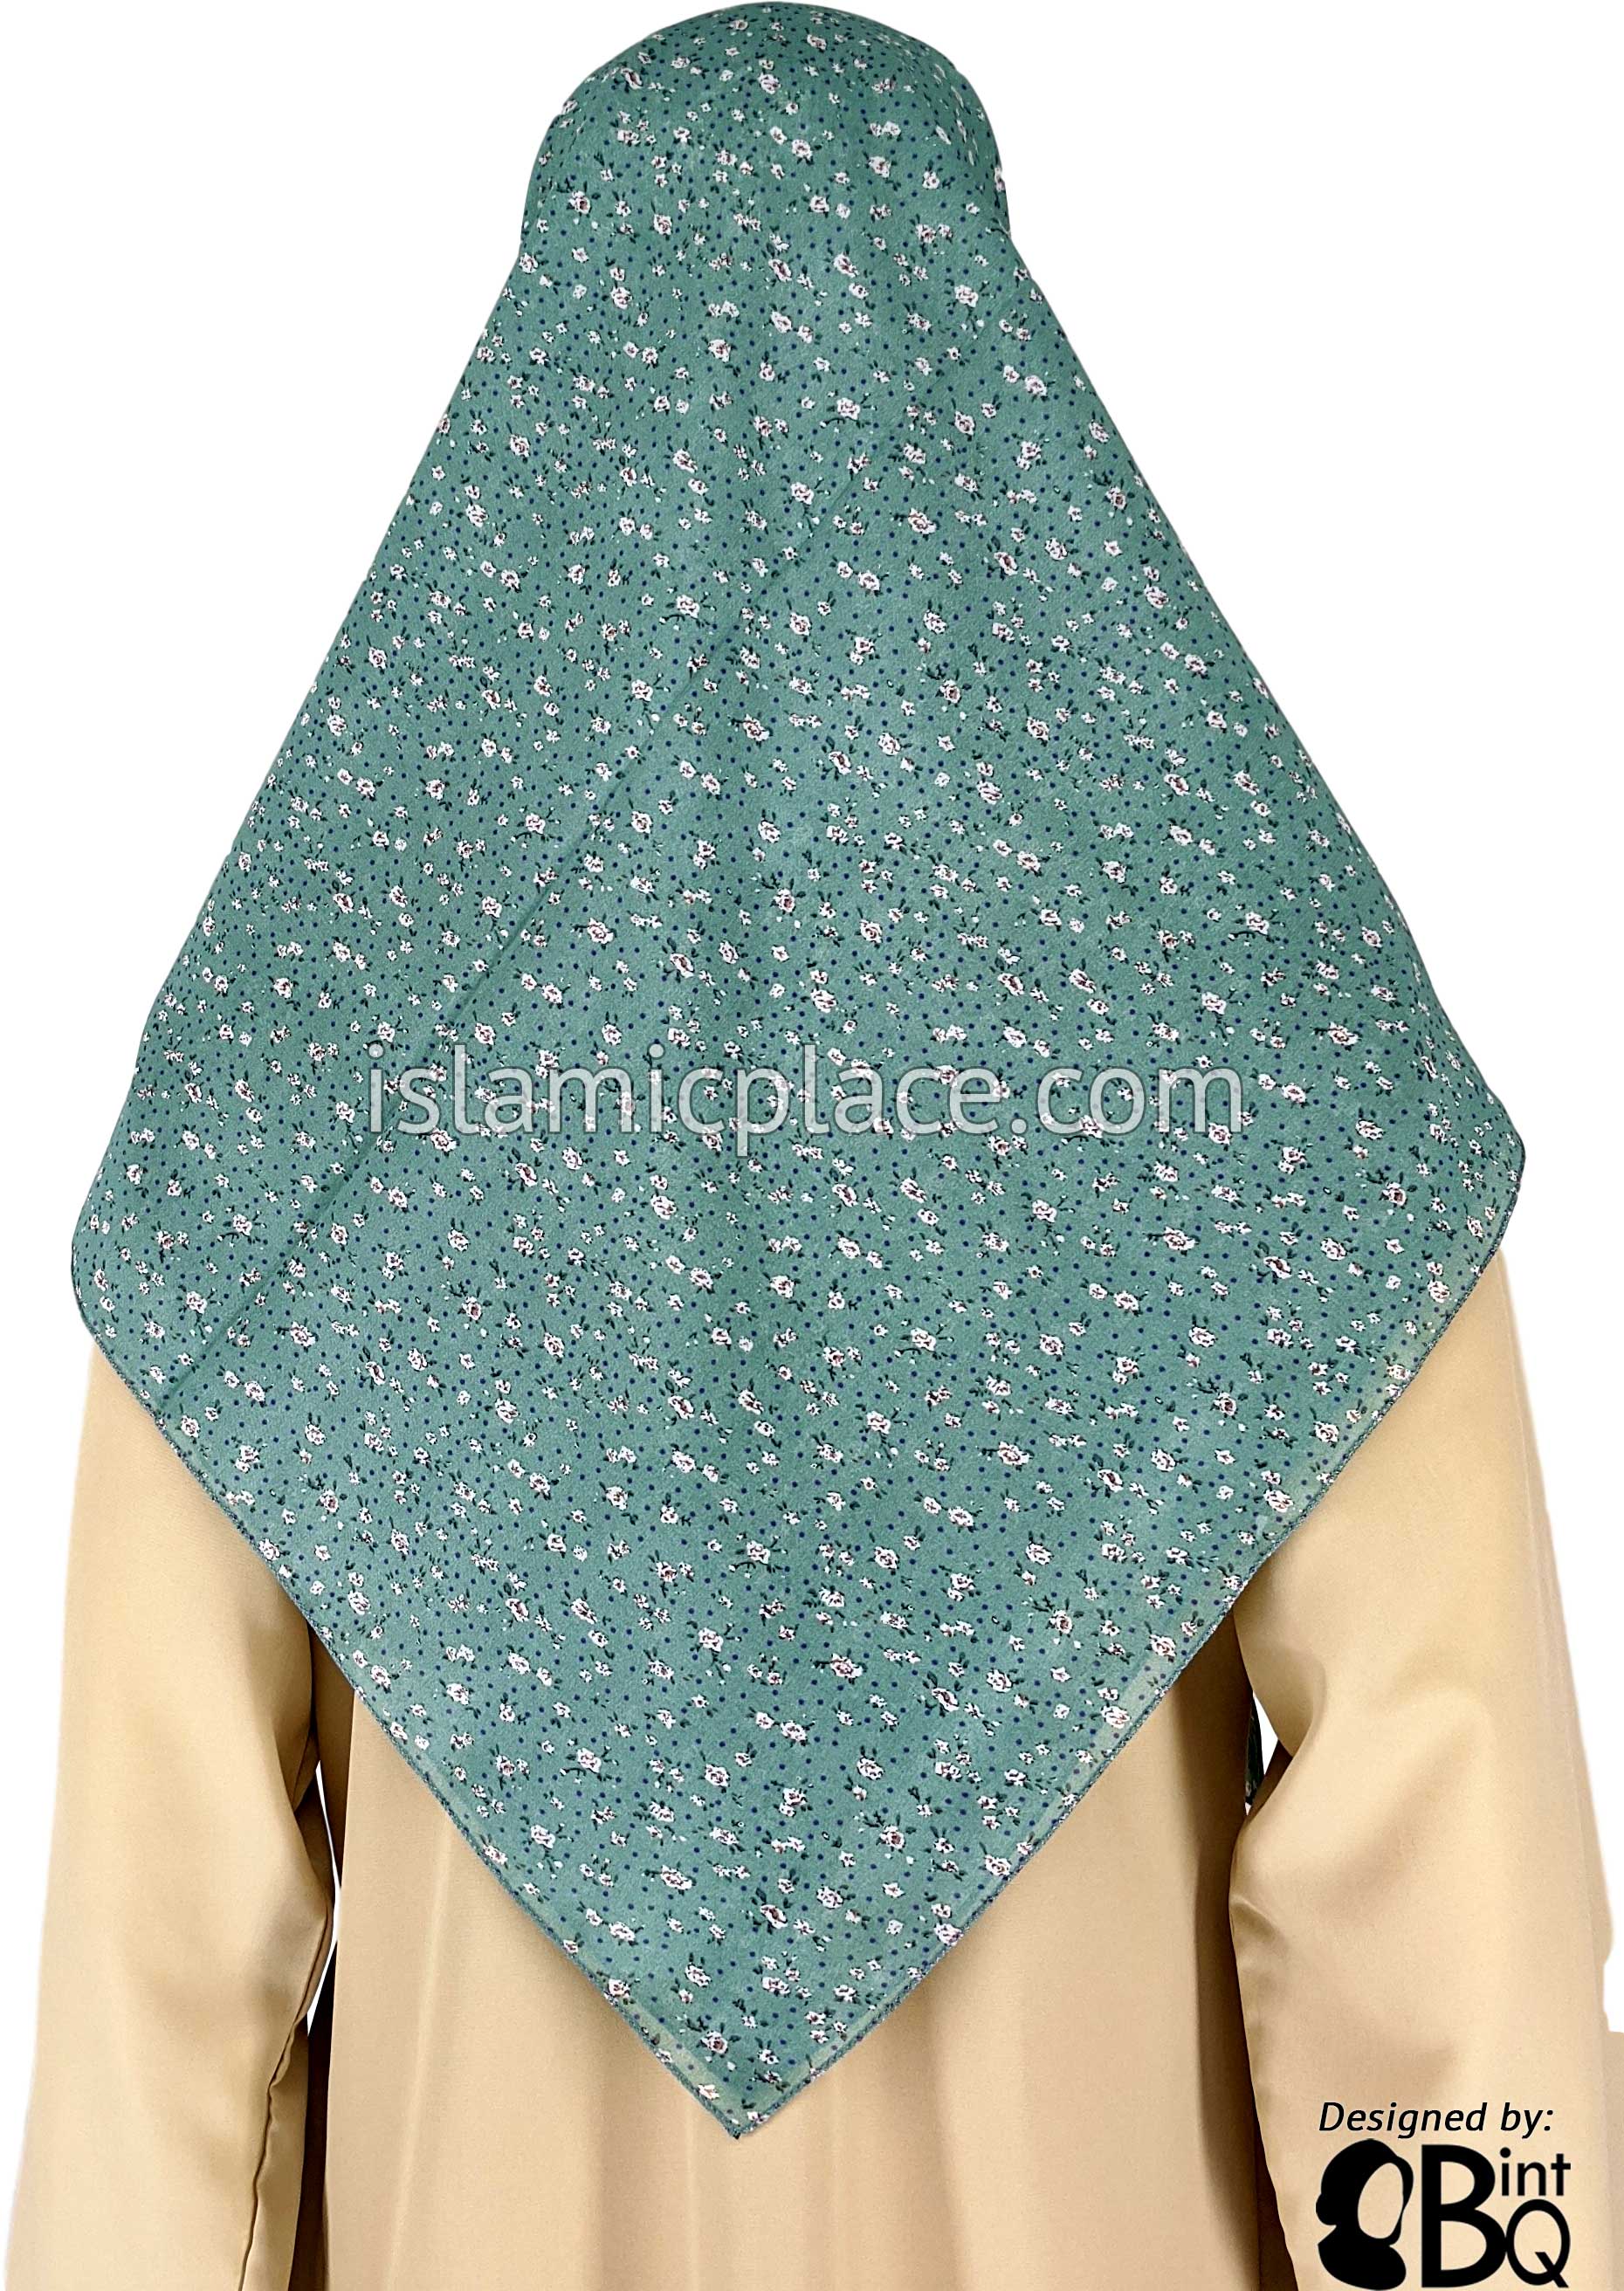 White And Brown Flower Bunches On Light Green With Purple Dots - 45" Square Printed Khimar